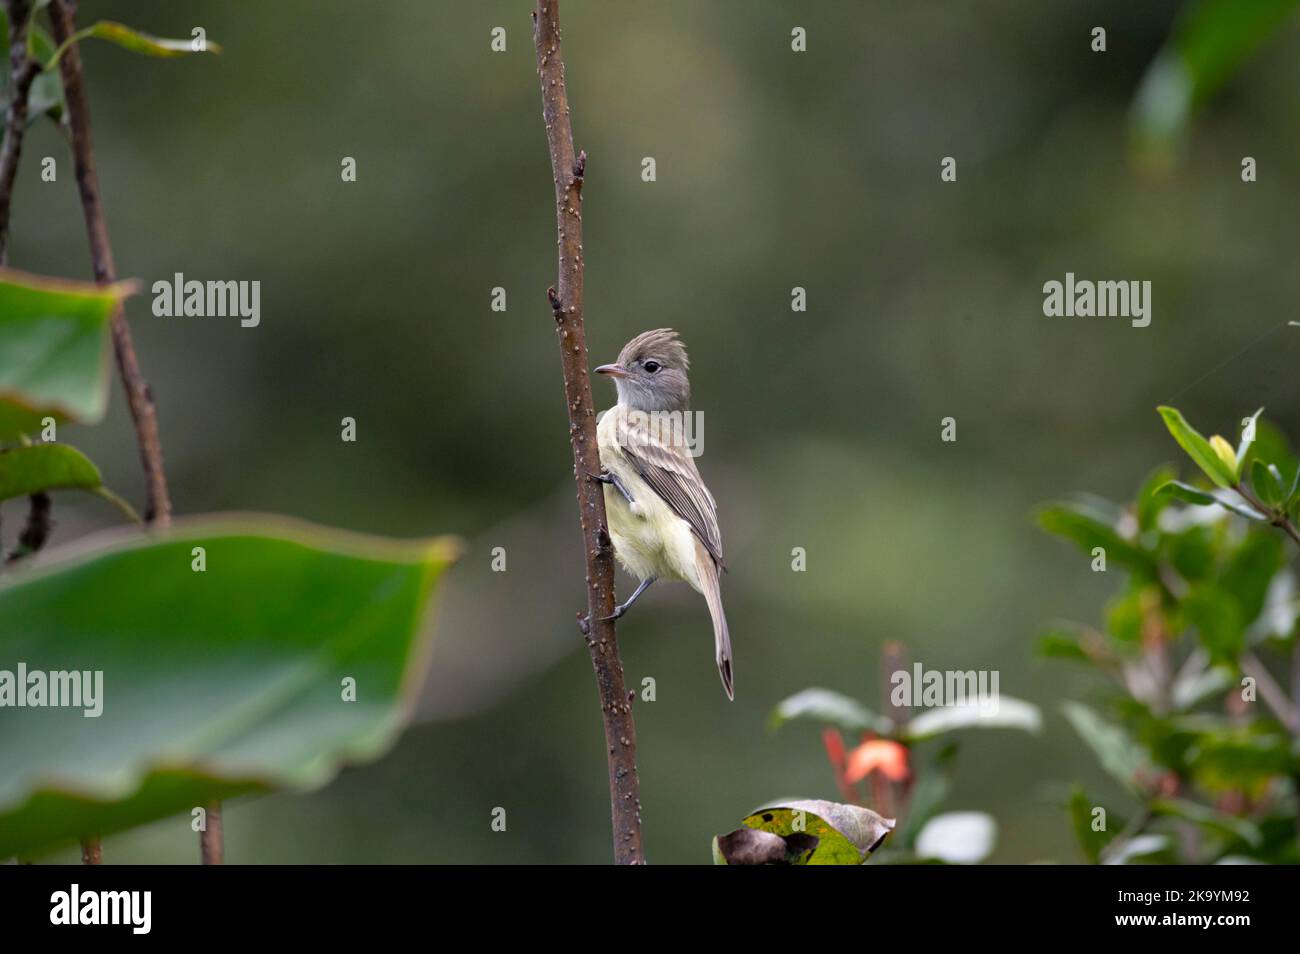 Yellow-bellied Elaenia (Elaenia flavogaster) perched on a tree branch Stock Photo